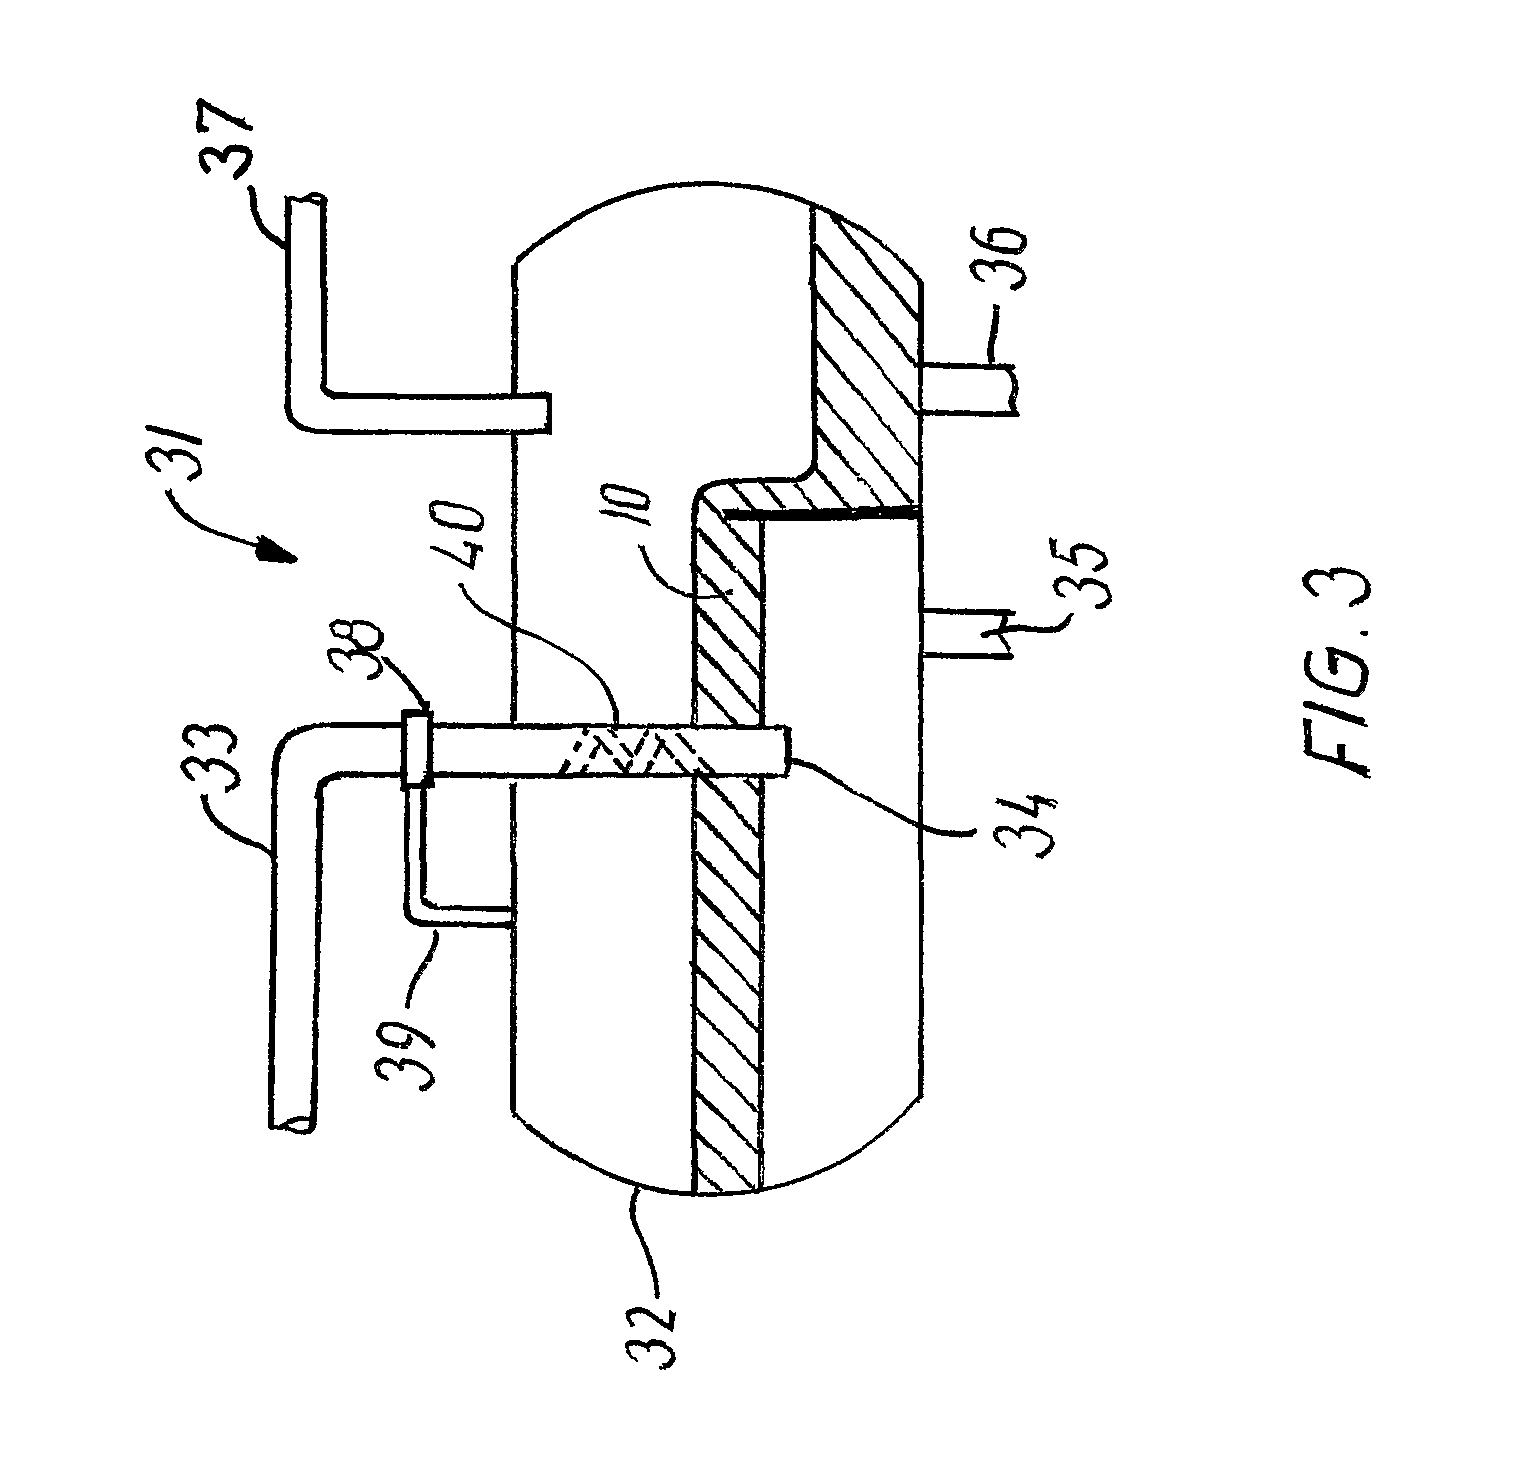 Gravity separator, and a method for separating a mixture containing water, oil, and gas